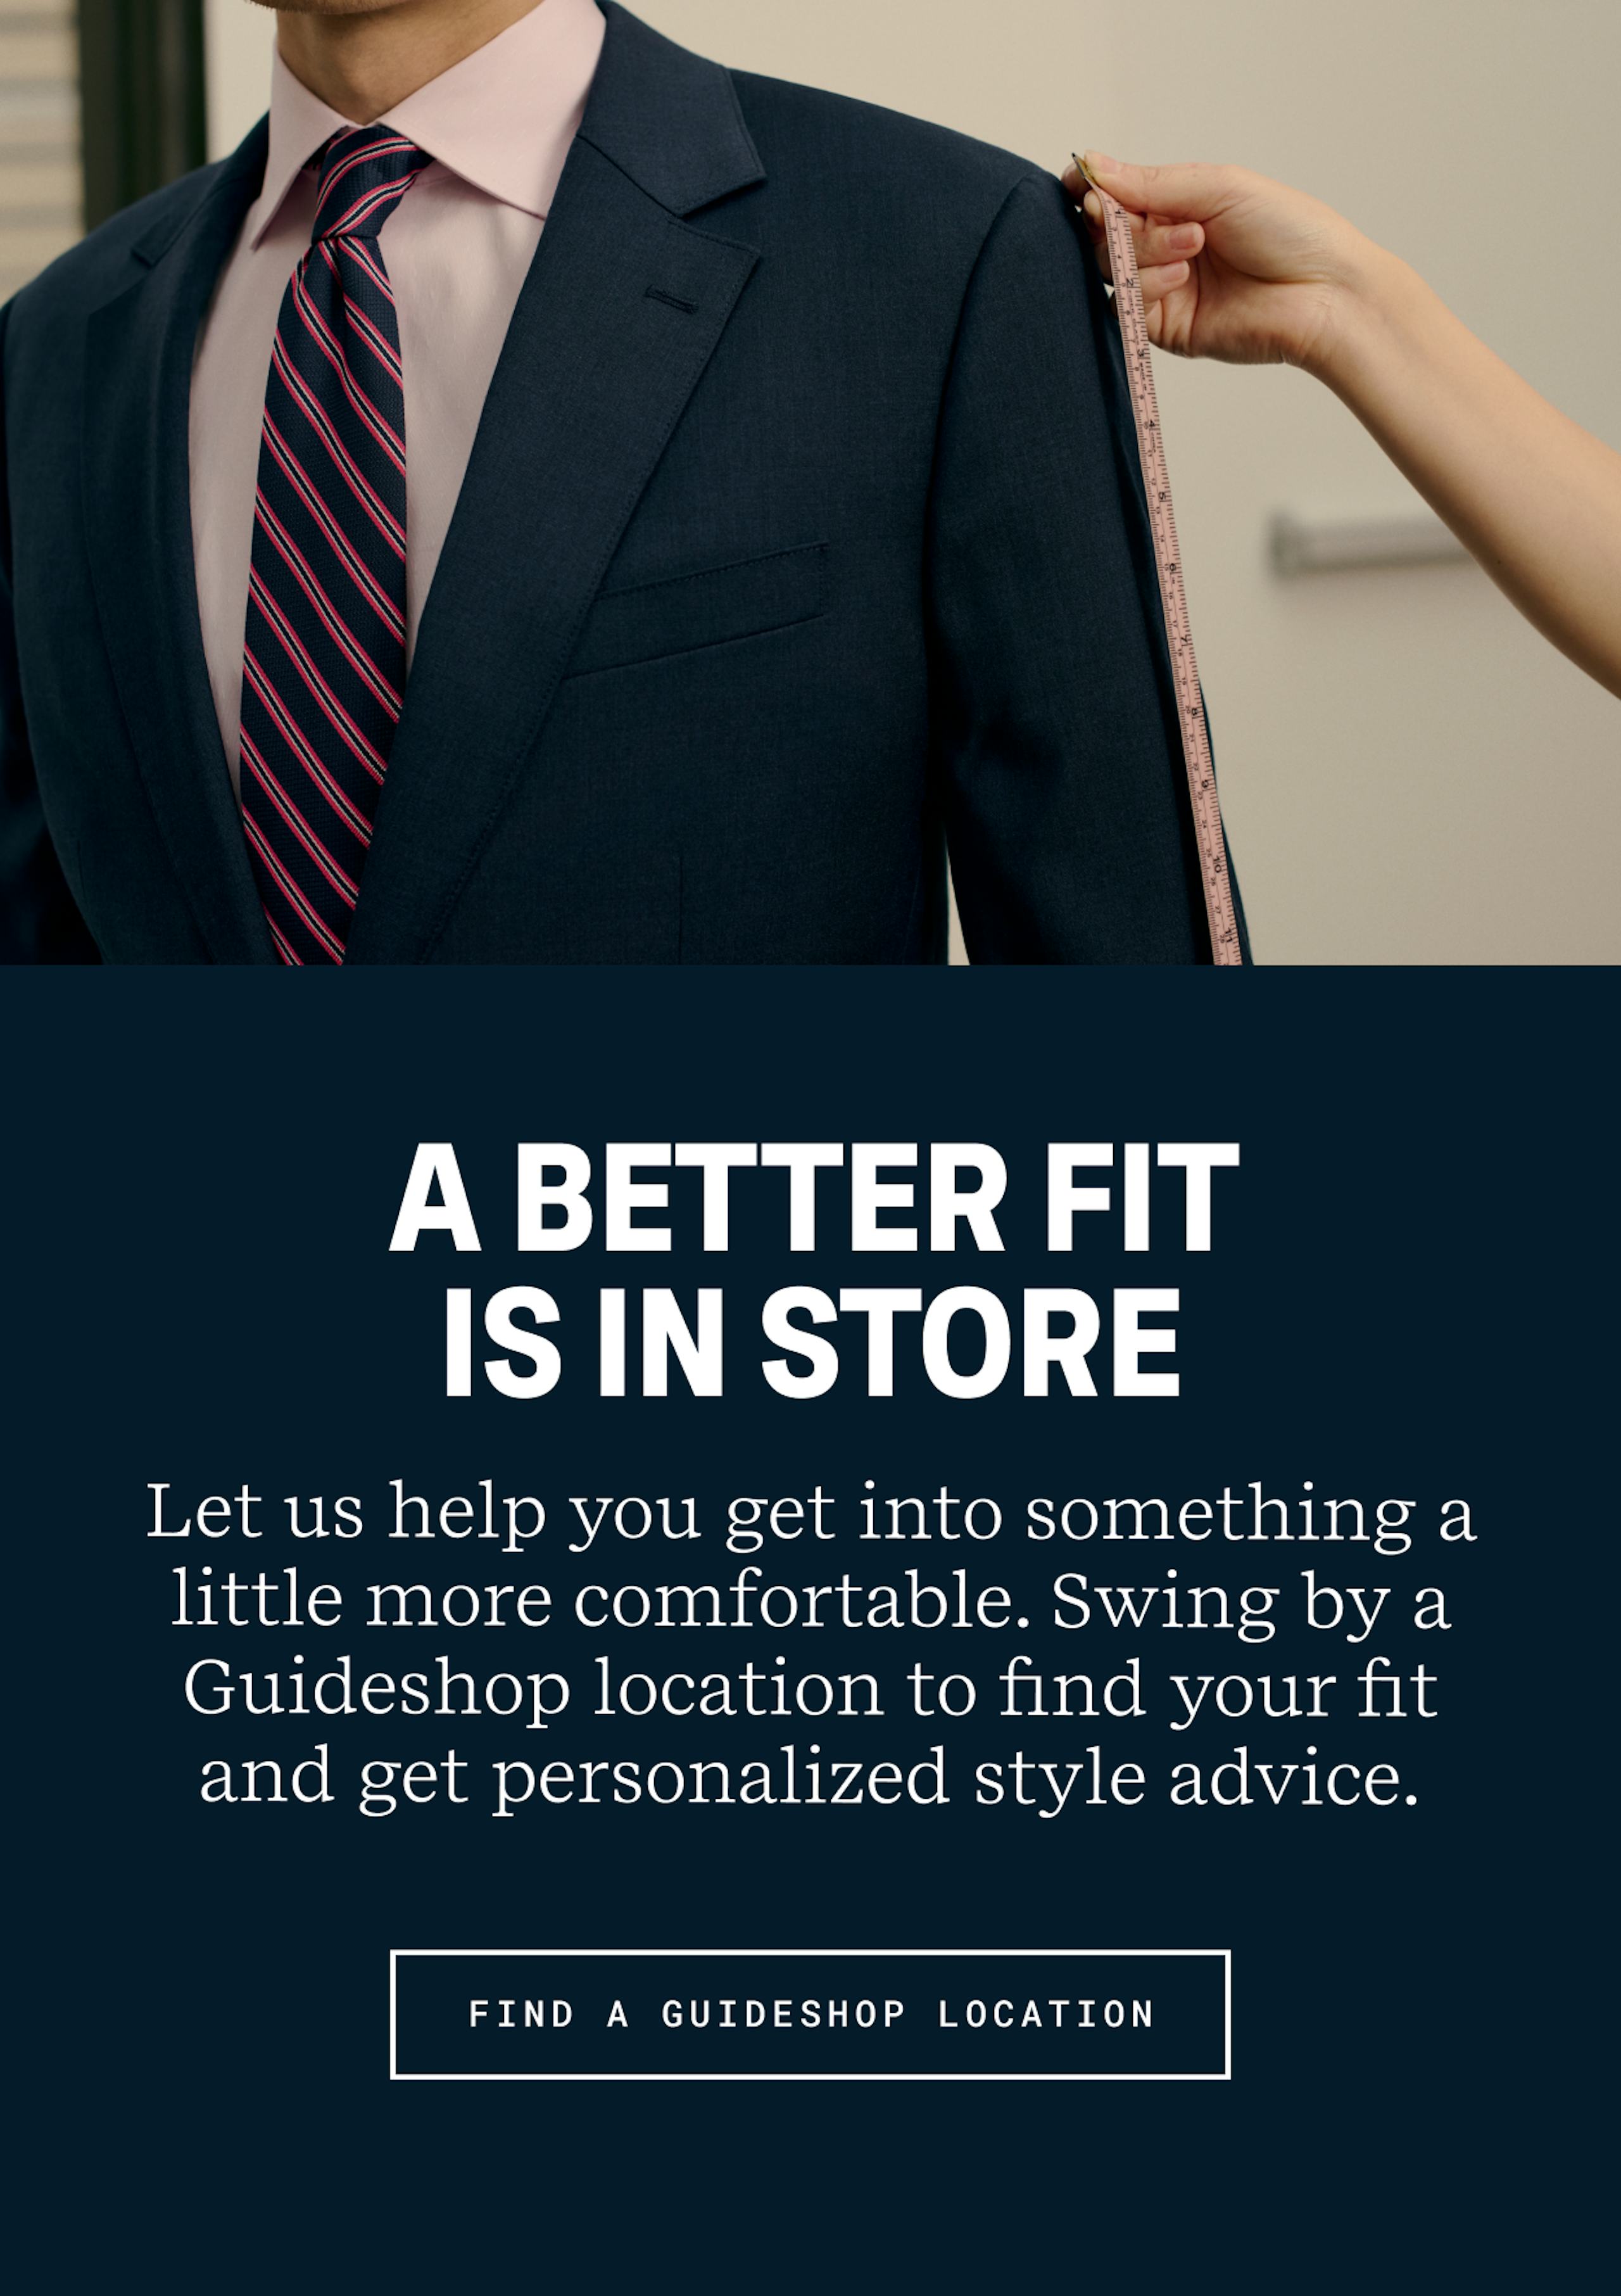 A Better Fit Is In Store | Let us help you get into something a little more comfortable. Swing by a Guideshop location to find your fit and get personalized style advice. | Find a Guideshop location